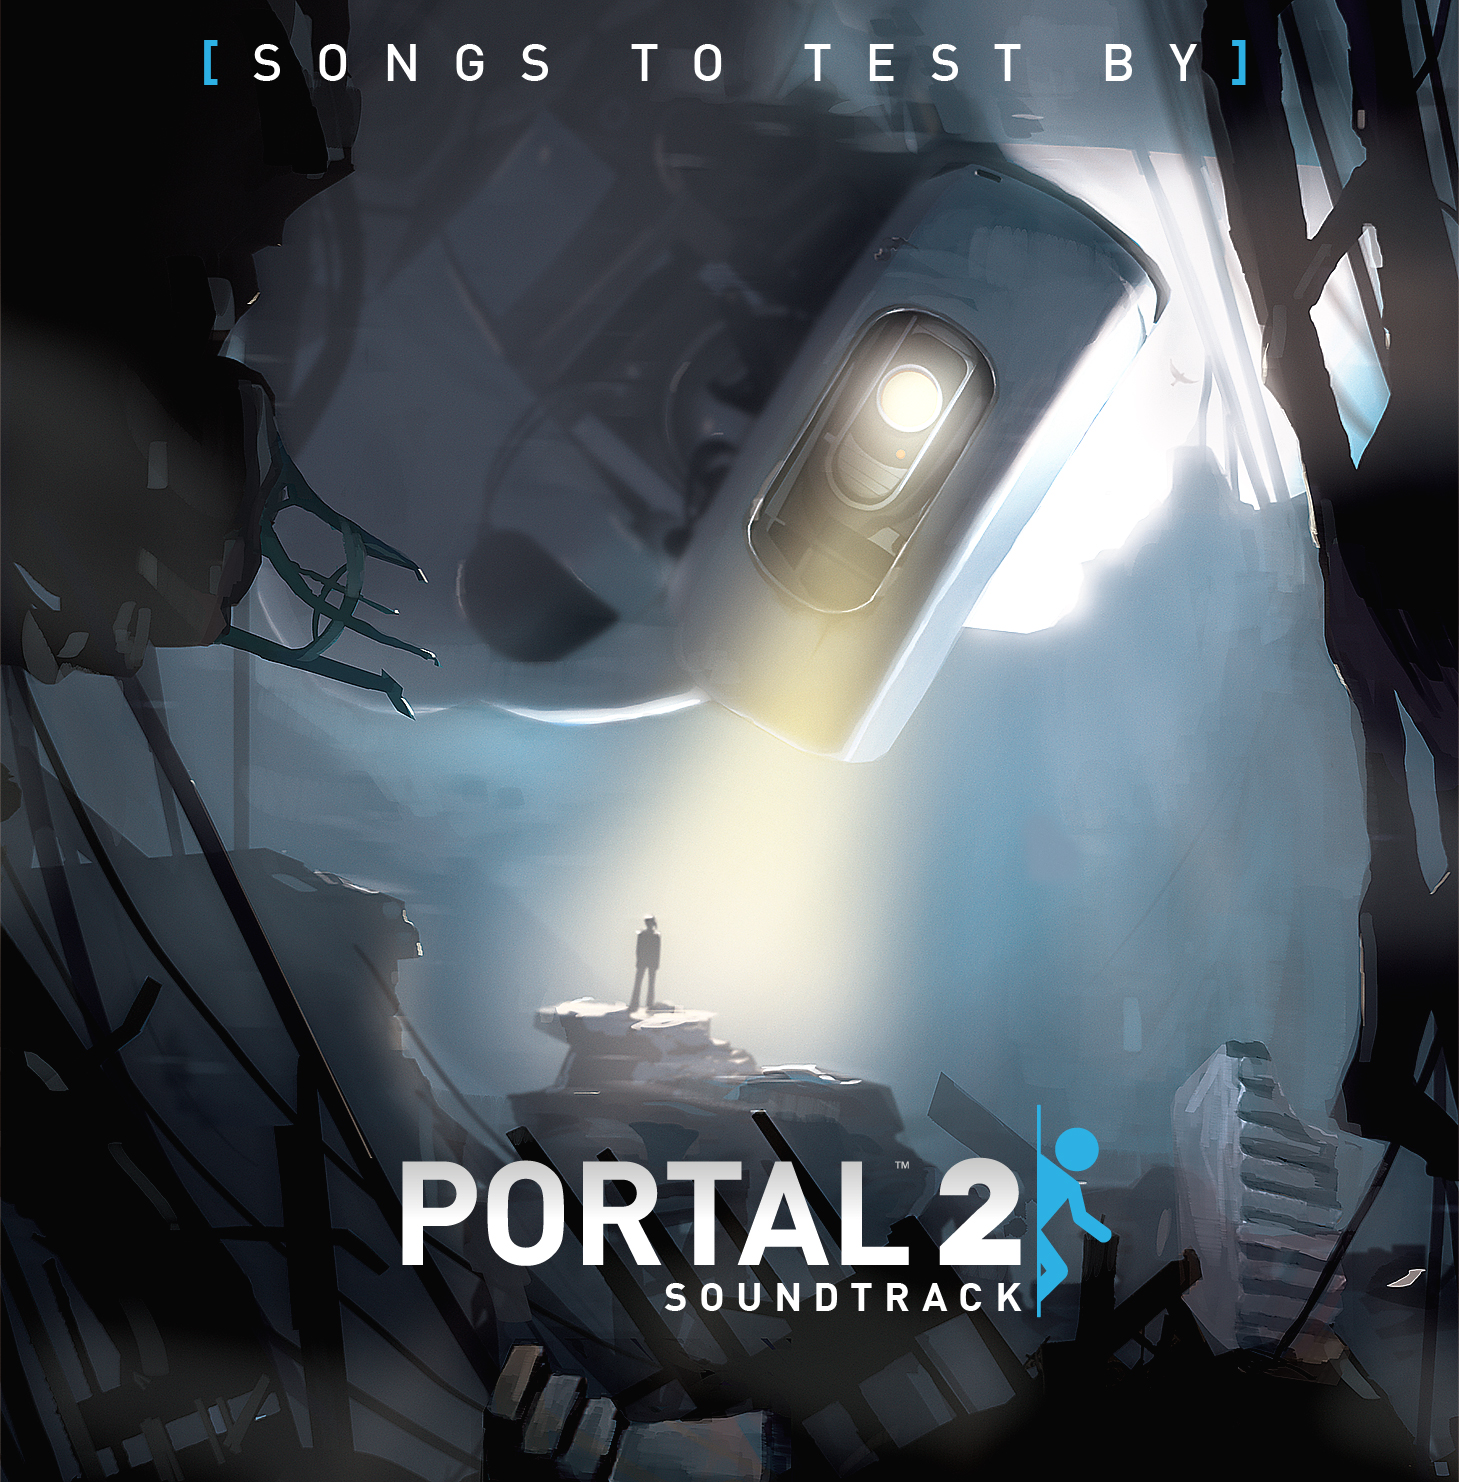 Portal 2 music to test by (120) фото